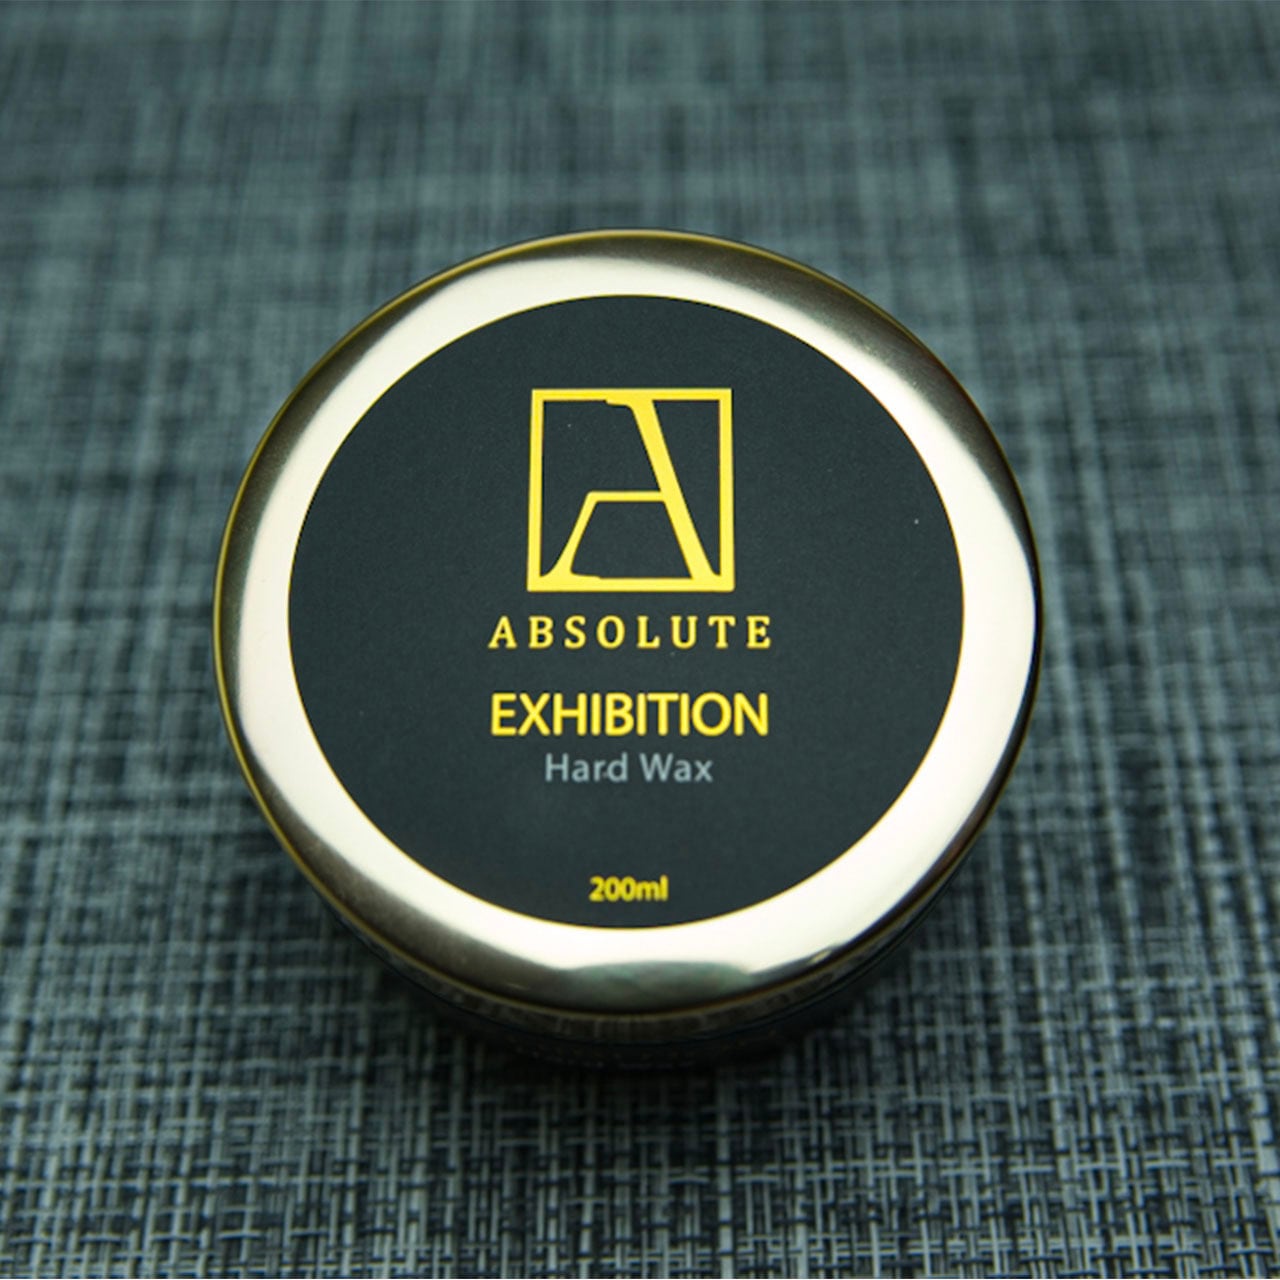 ABSOLUTE Wax NATURA 200ml BLT Gサービスメンテナンス